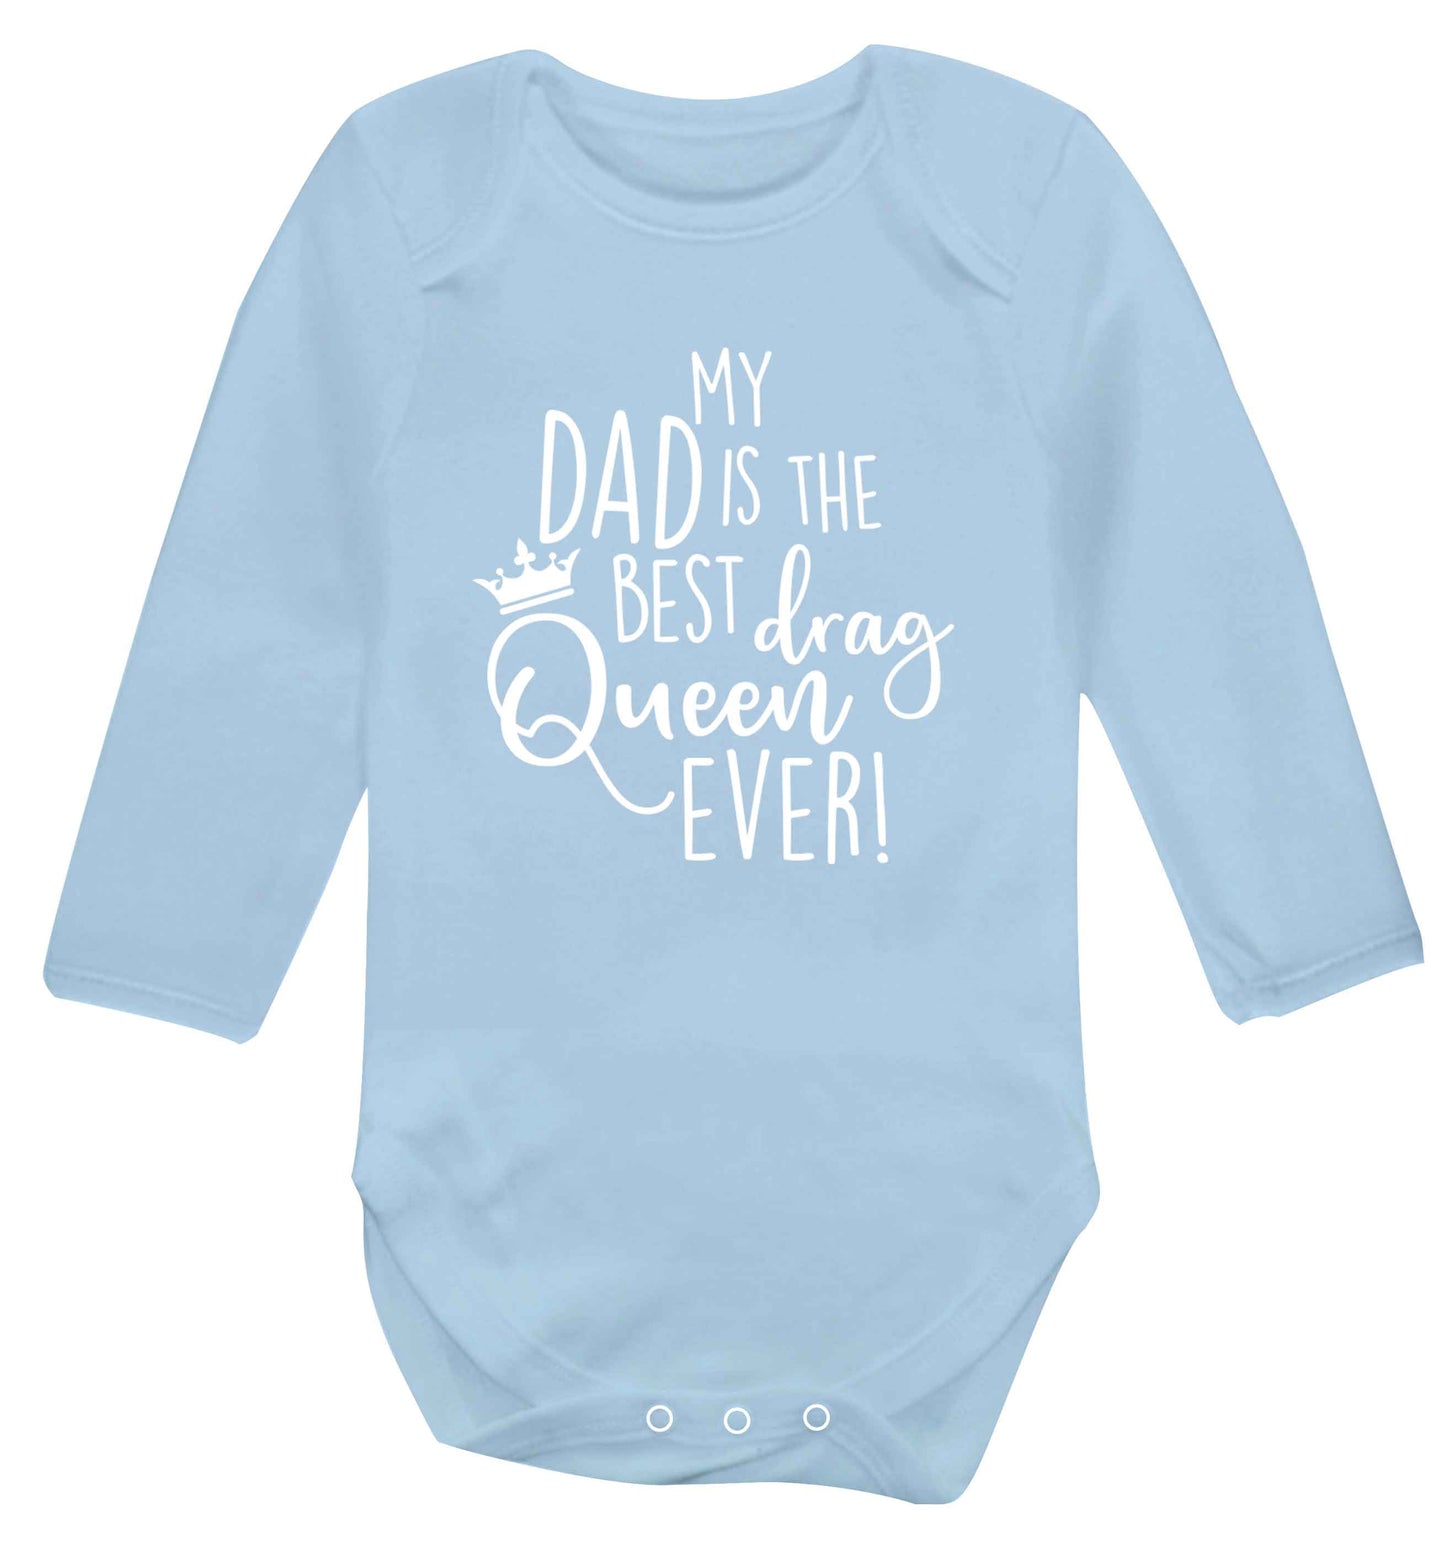 My dad is the best drag Queen ever Baby Vest long sleeved pale blue 6-12 months